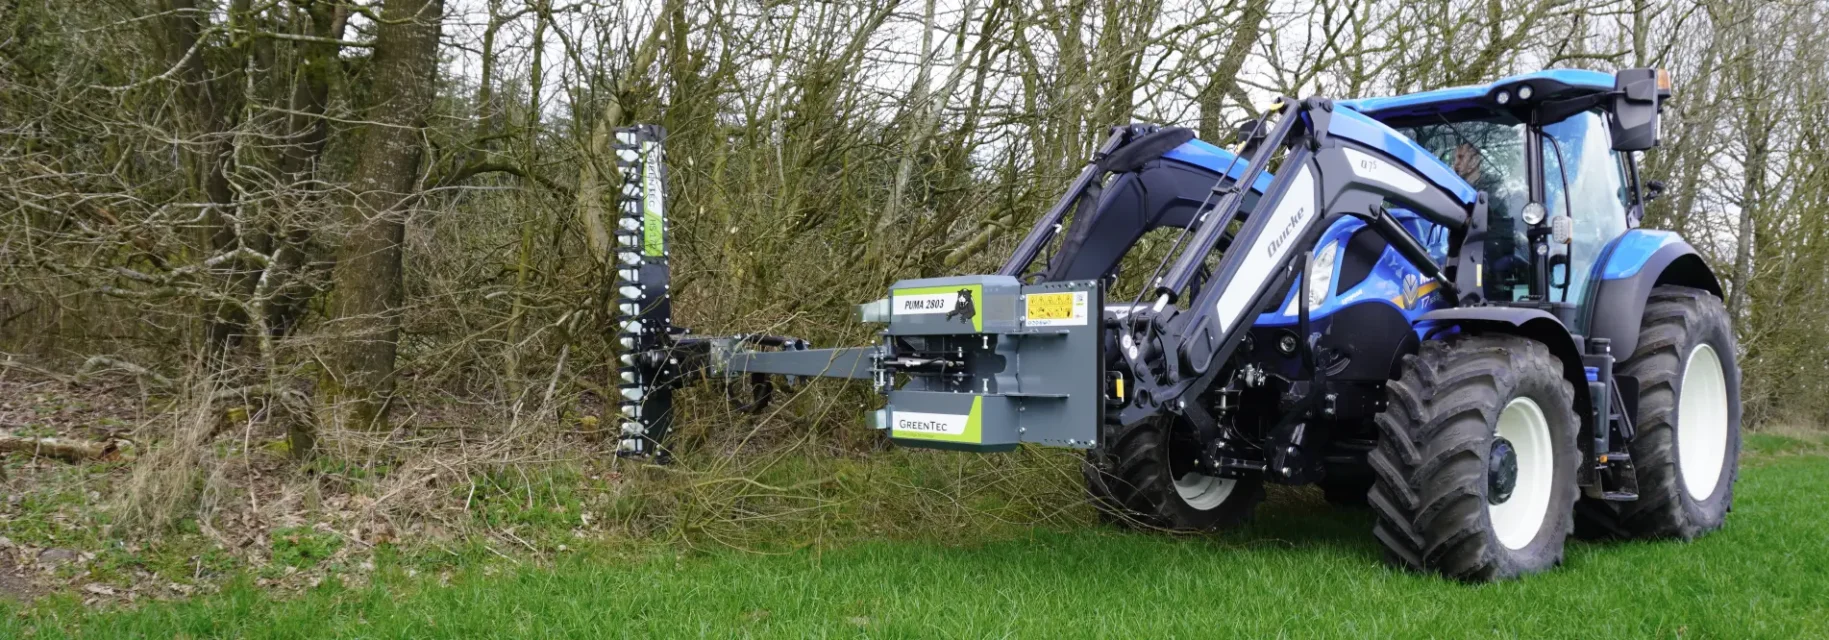 Hedge trimming with front end loader